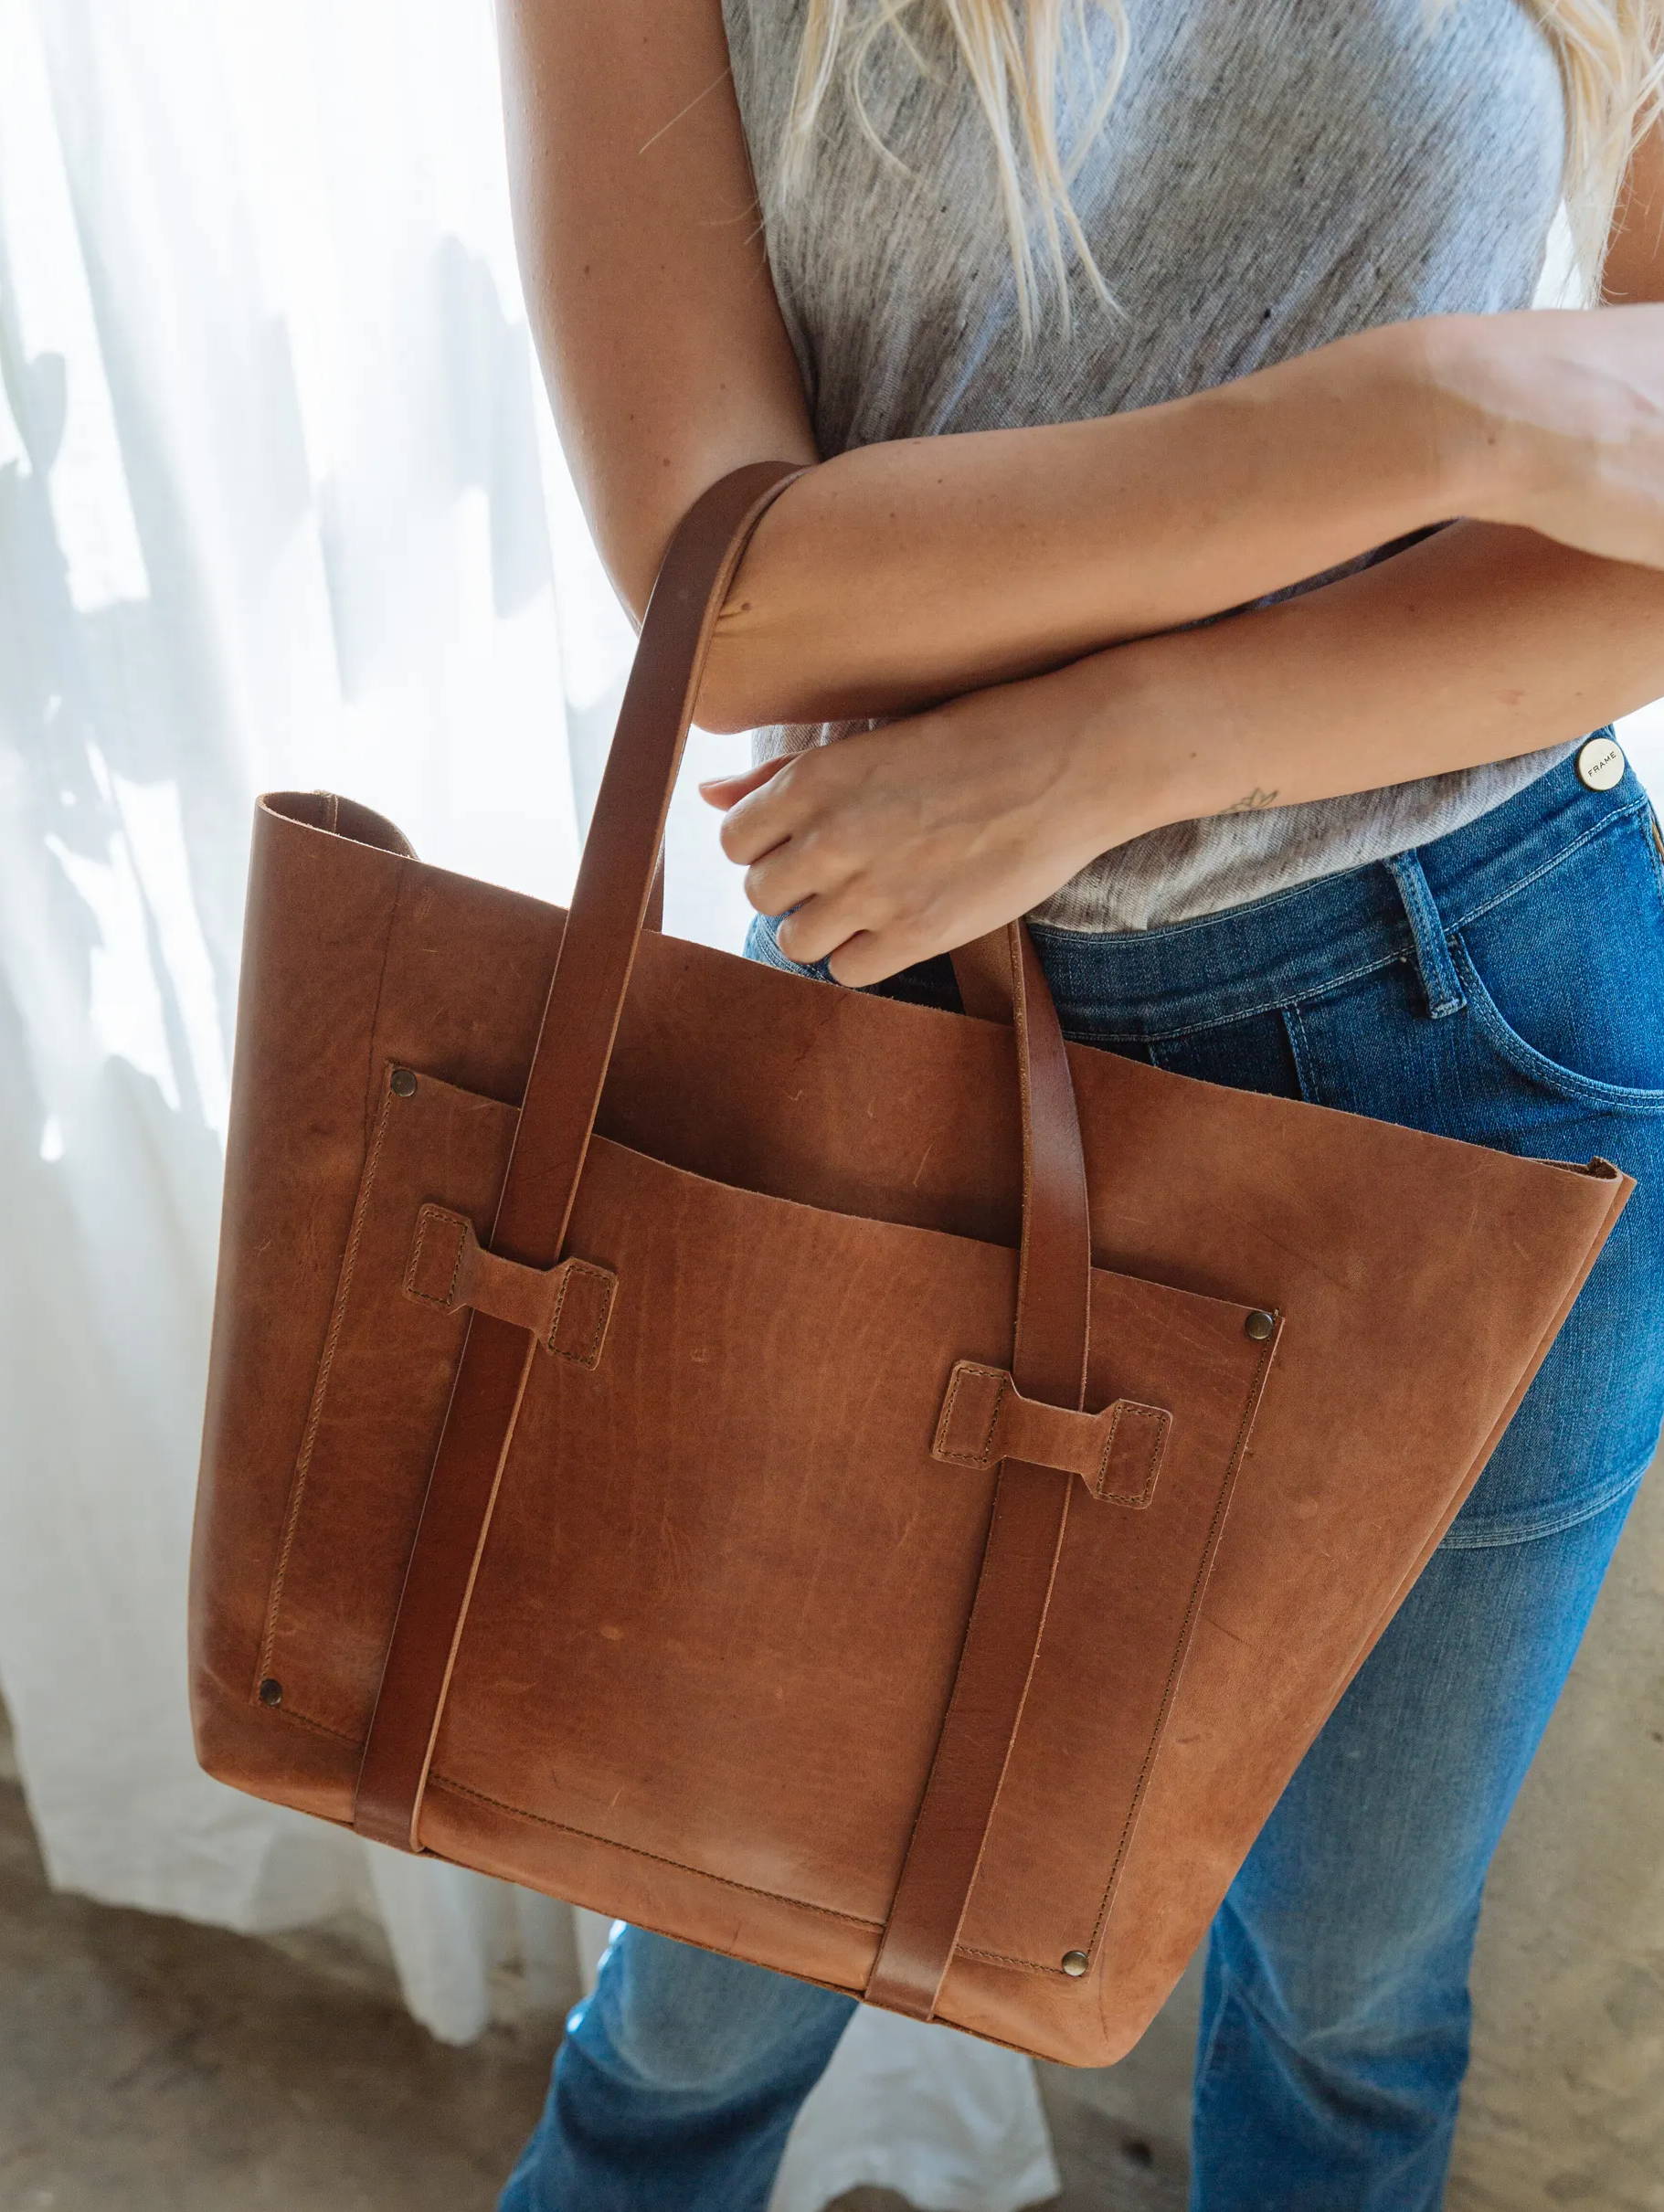 summer tote bag is an alternative to purse